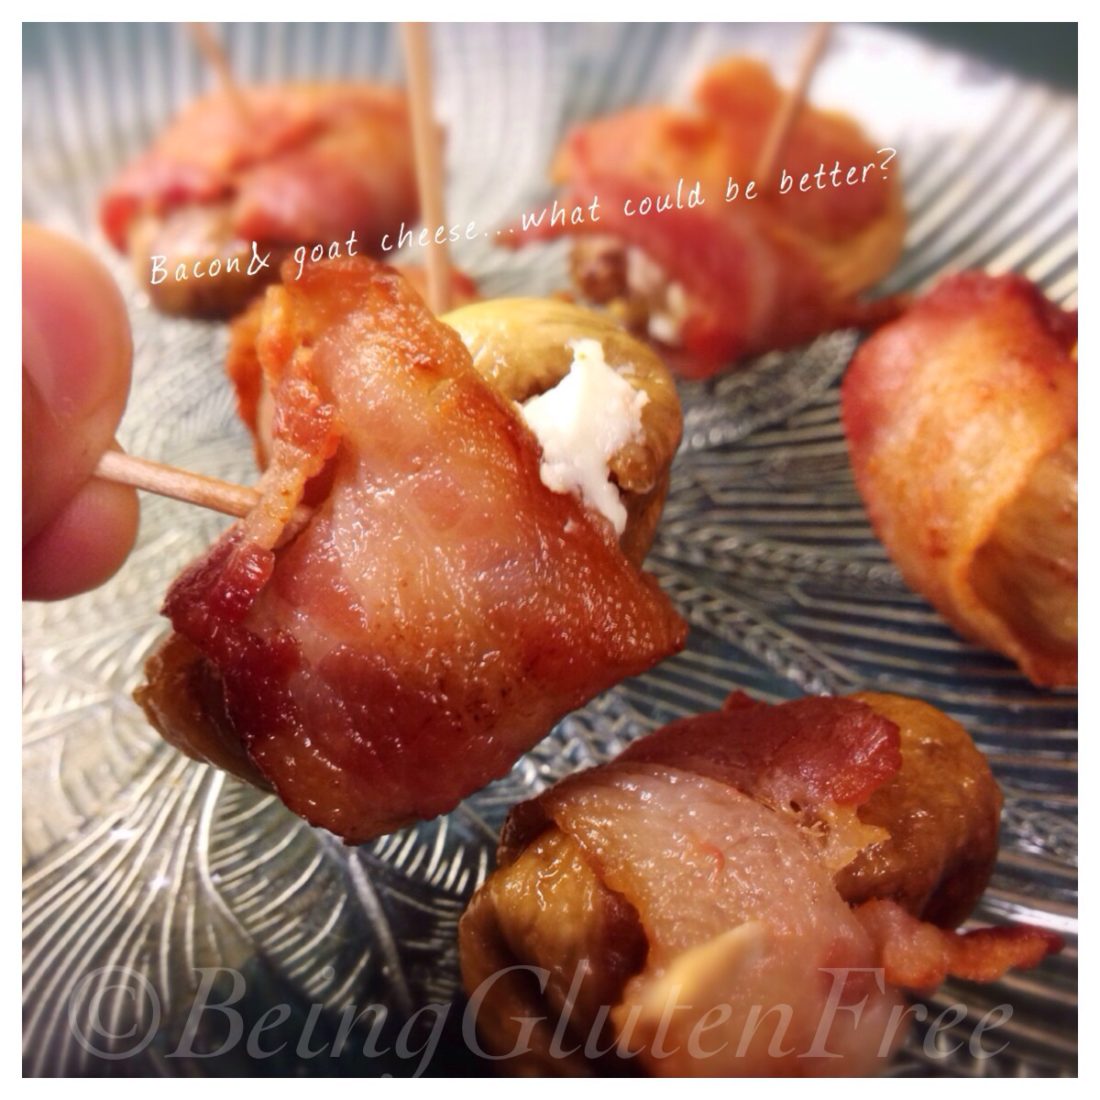 Bacon and goat cheese- yum!